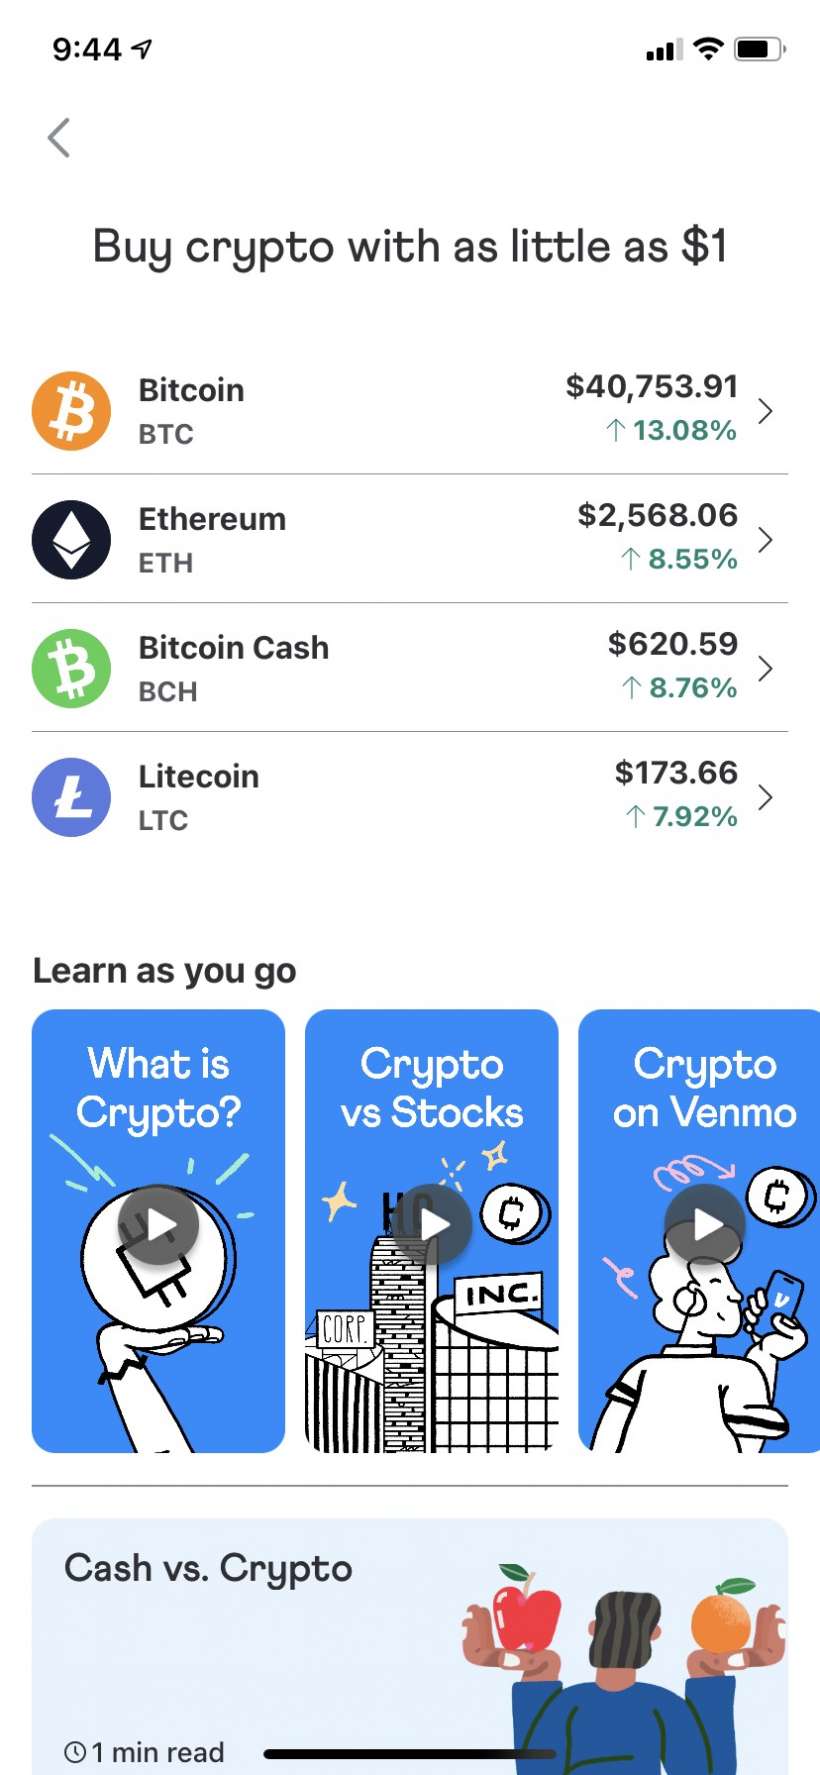 is it safe to buy crypto on venmo